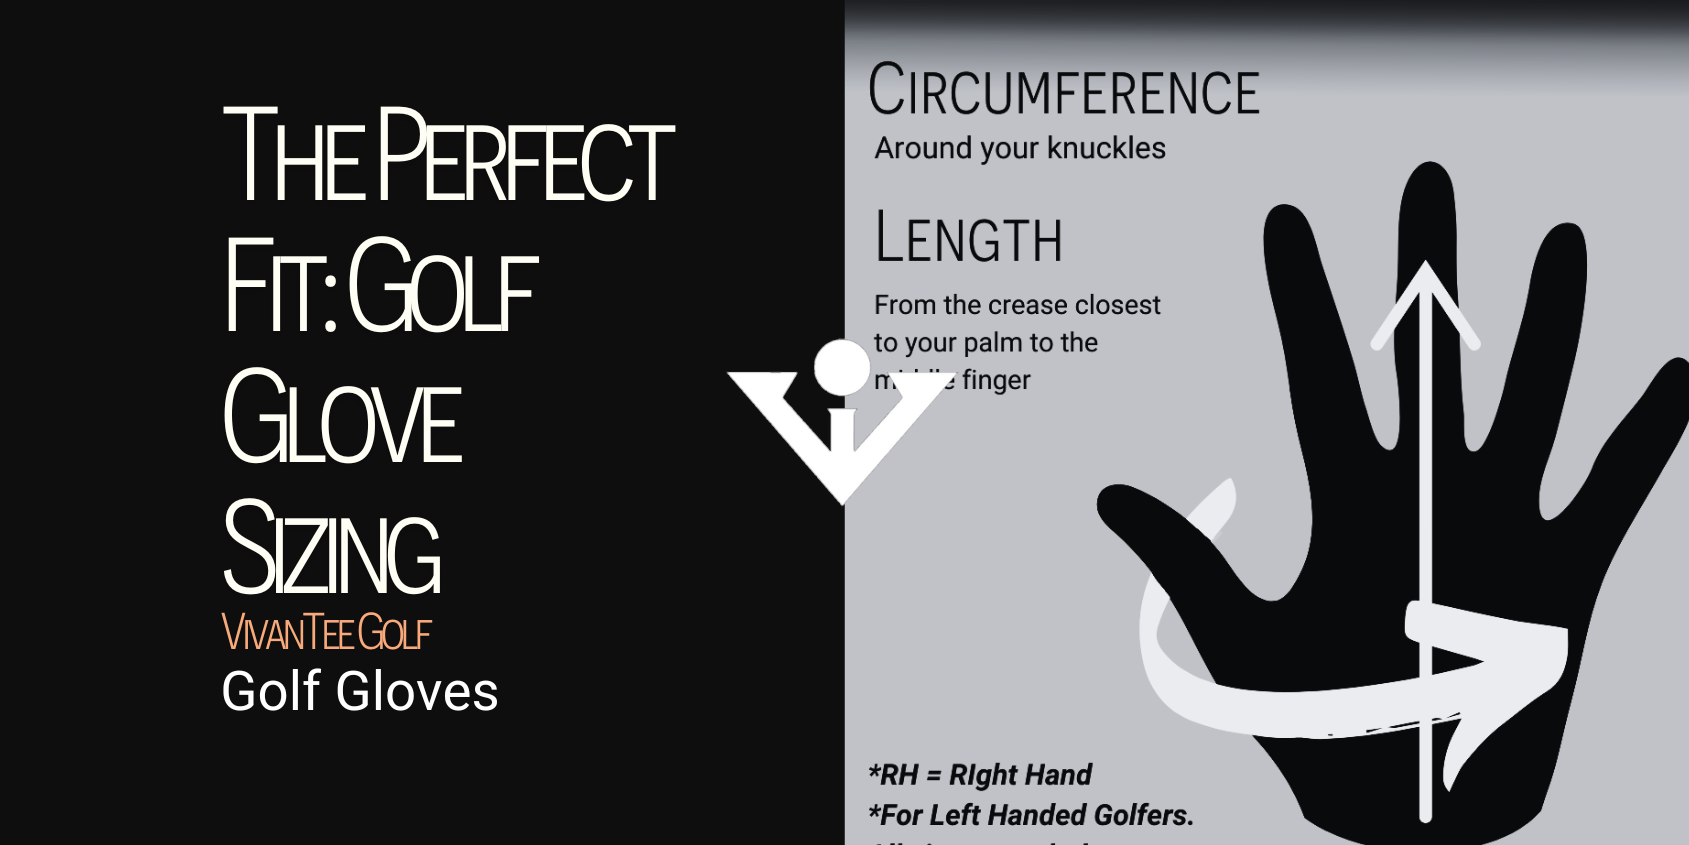 Golf Glove Sizes overview in our signature article banner along with golf glove size chart example.